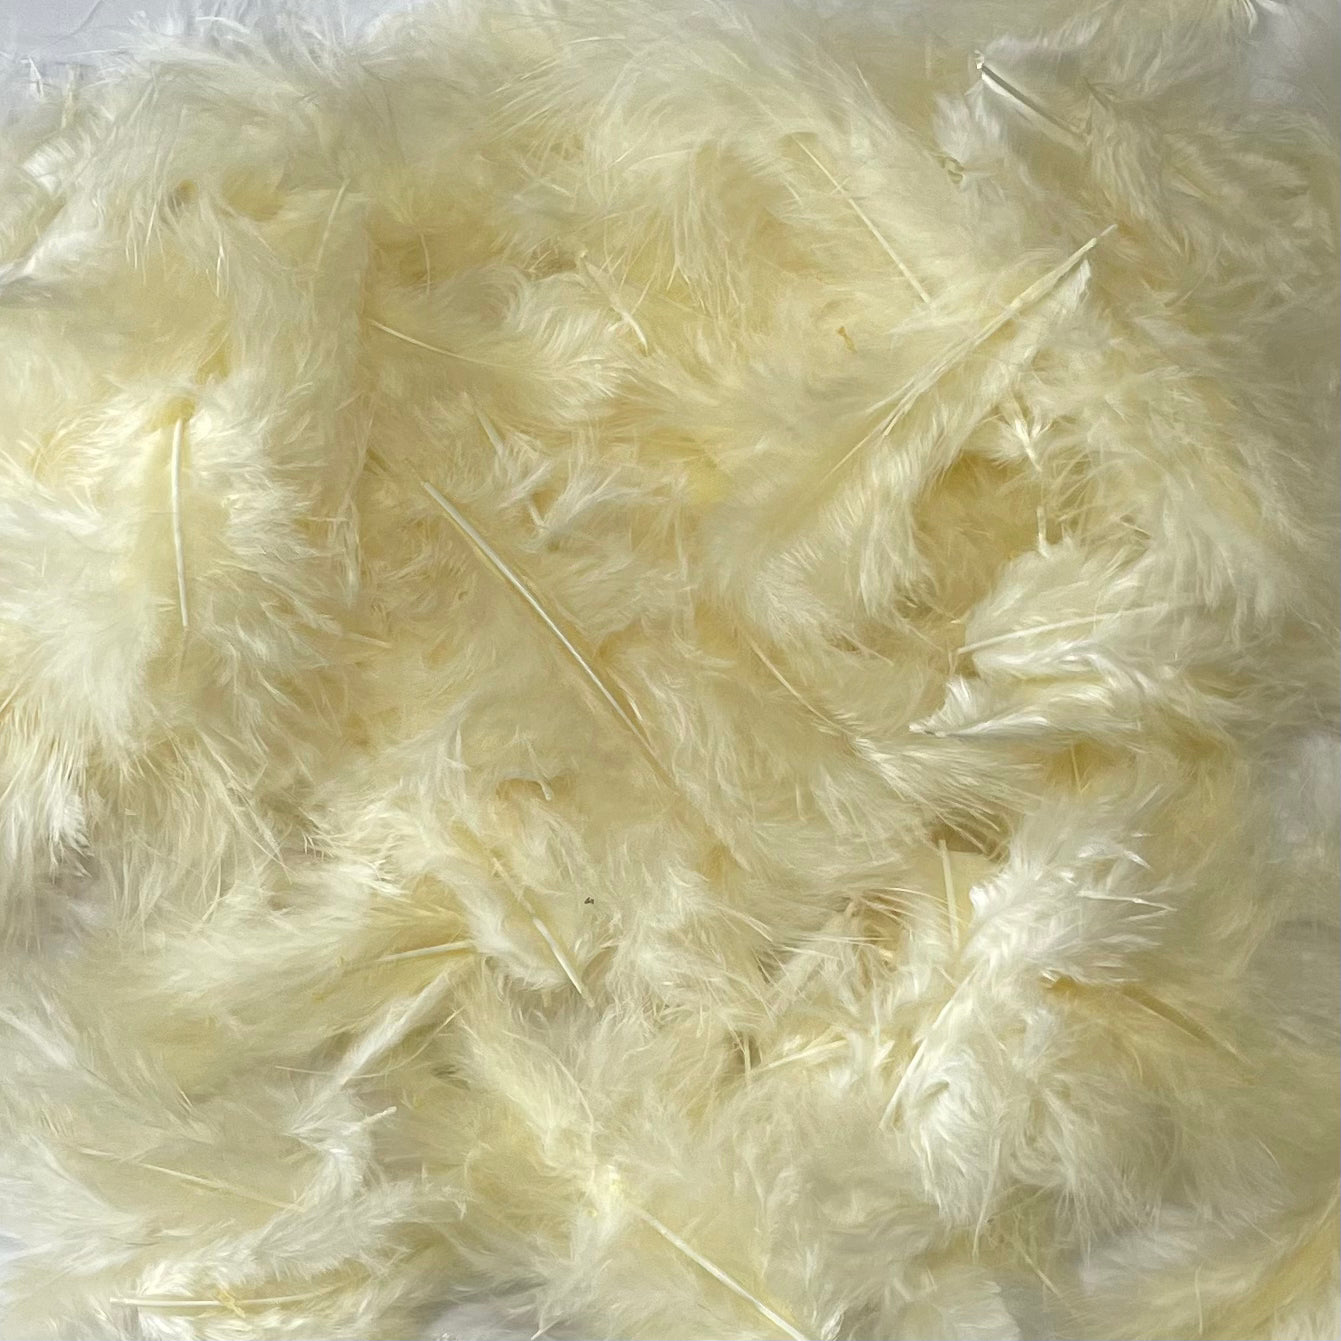 Fluffy Marabou Feather Plumage Pack 10 grams - Ivory